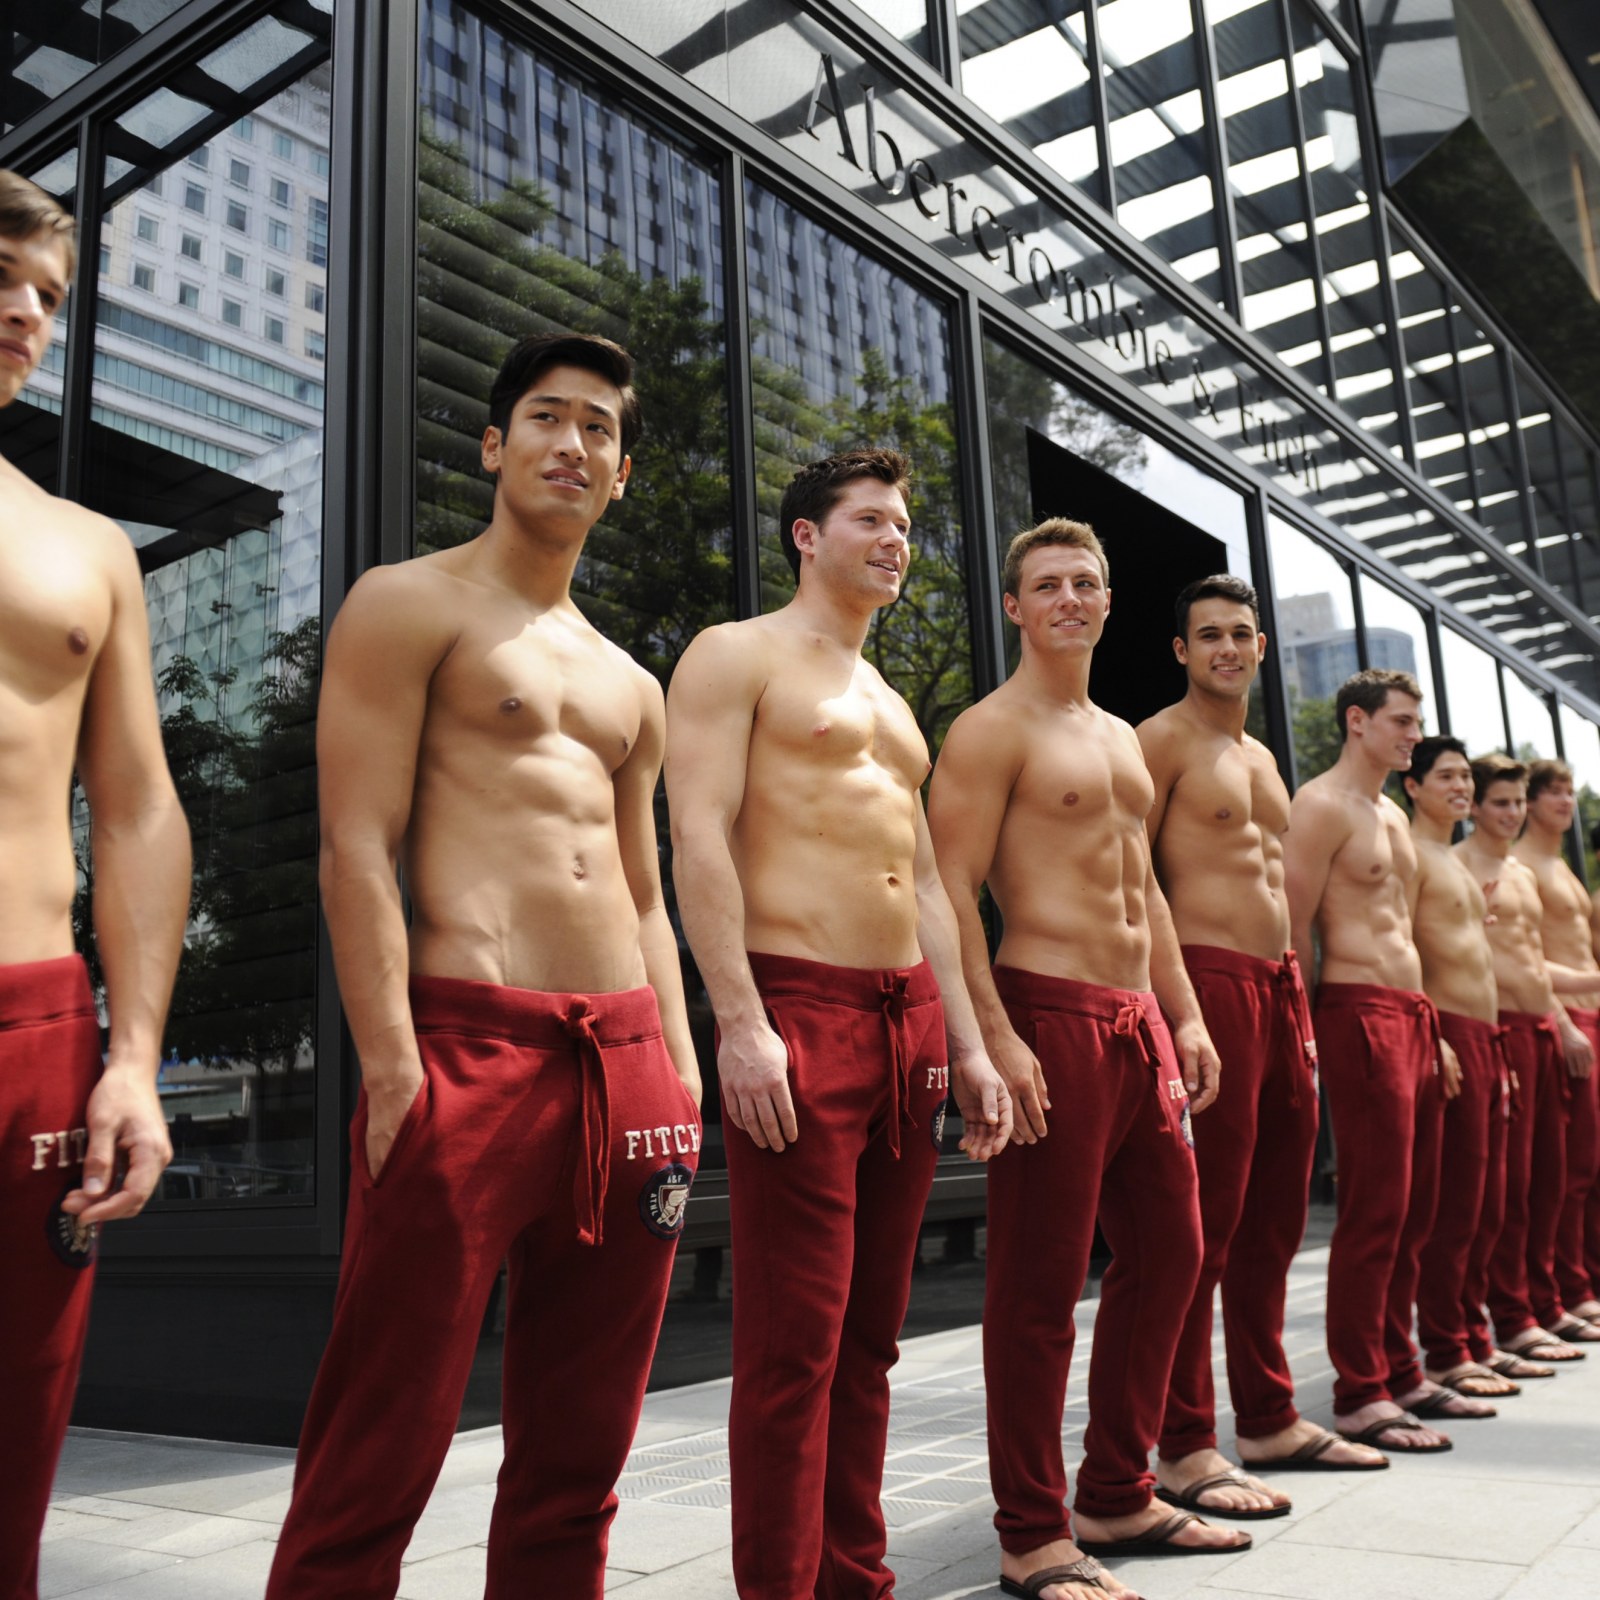 Series Fitch & Former Viral Brand TikTok in Model Abercrombie the \'Exposes\'